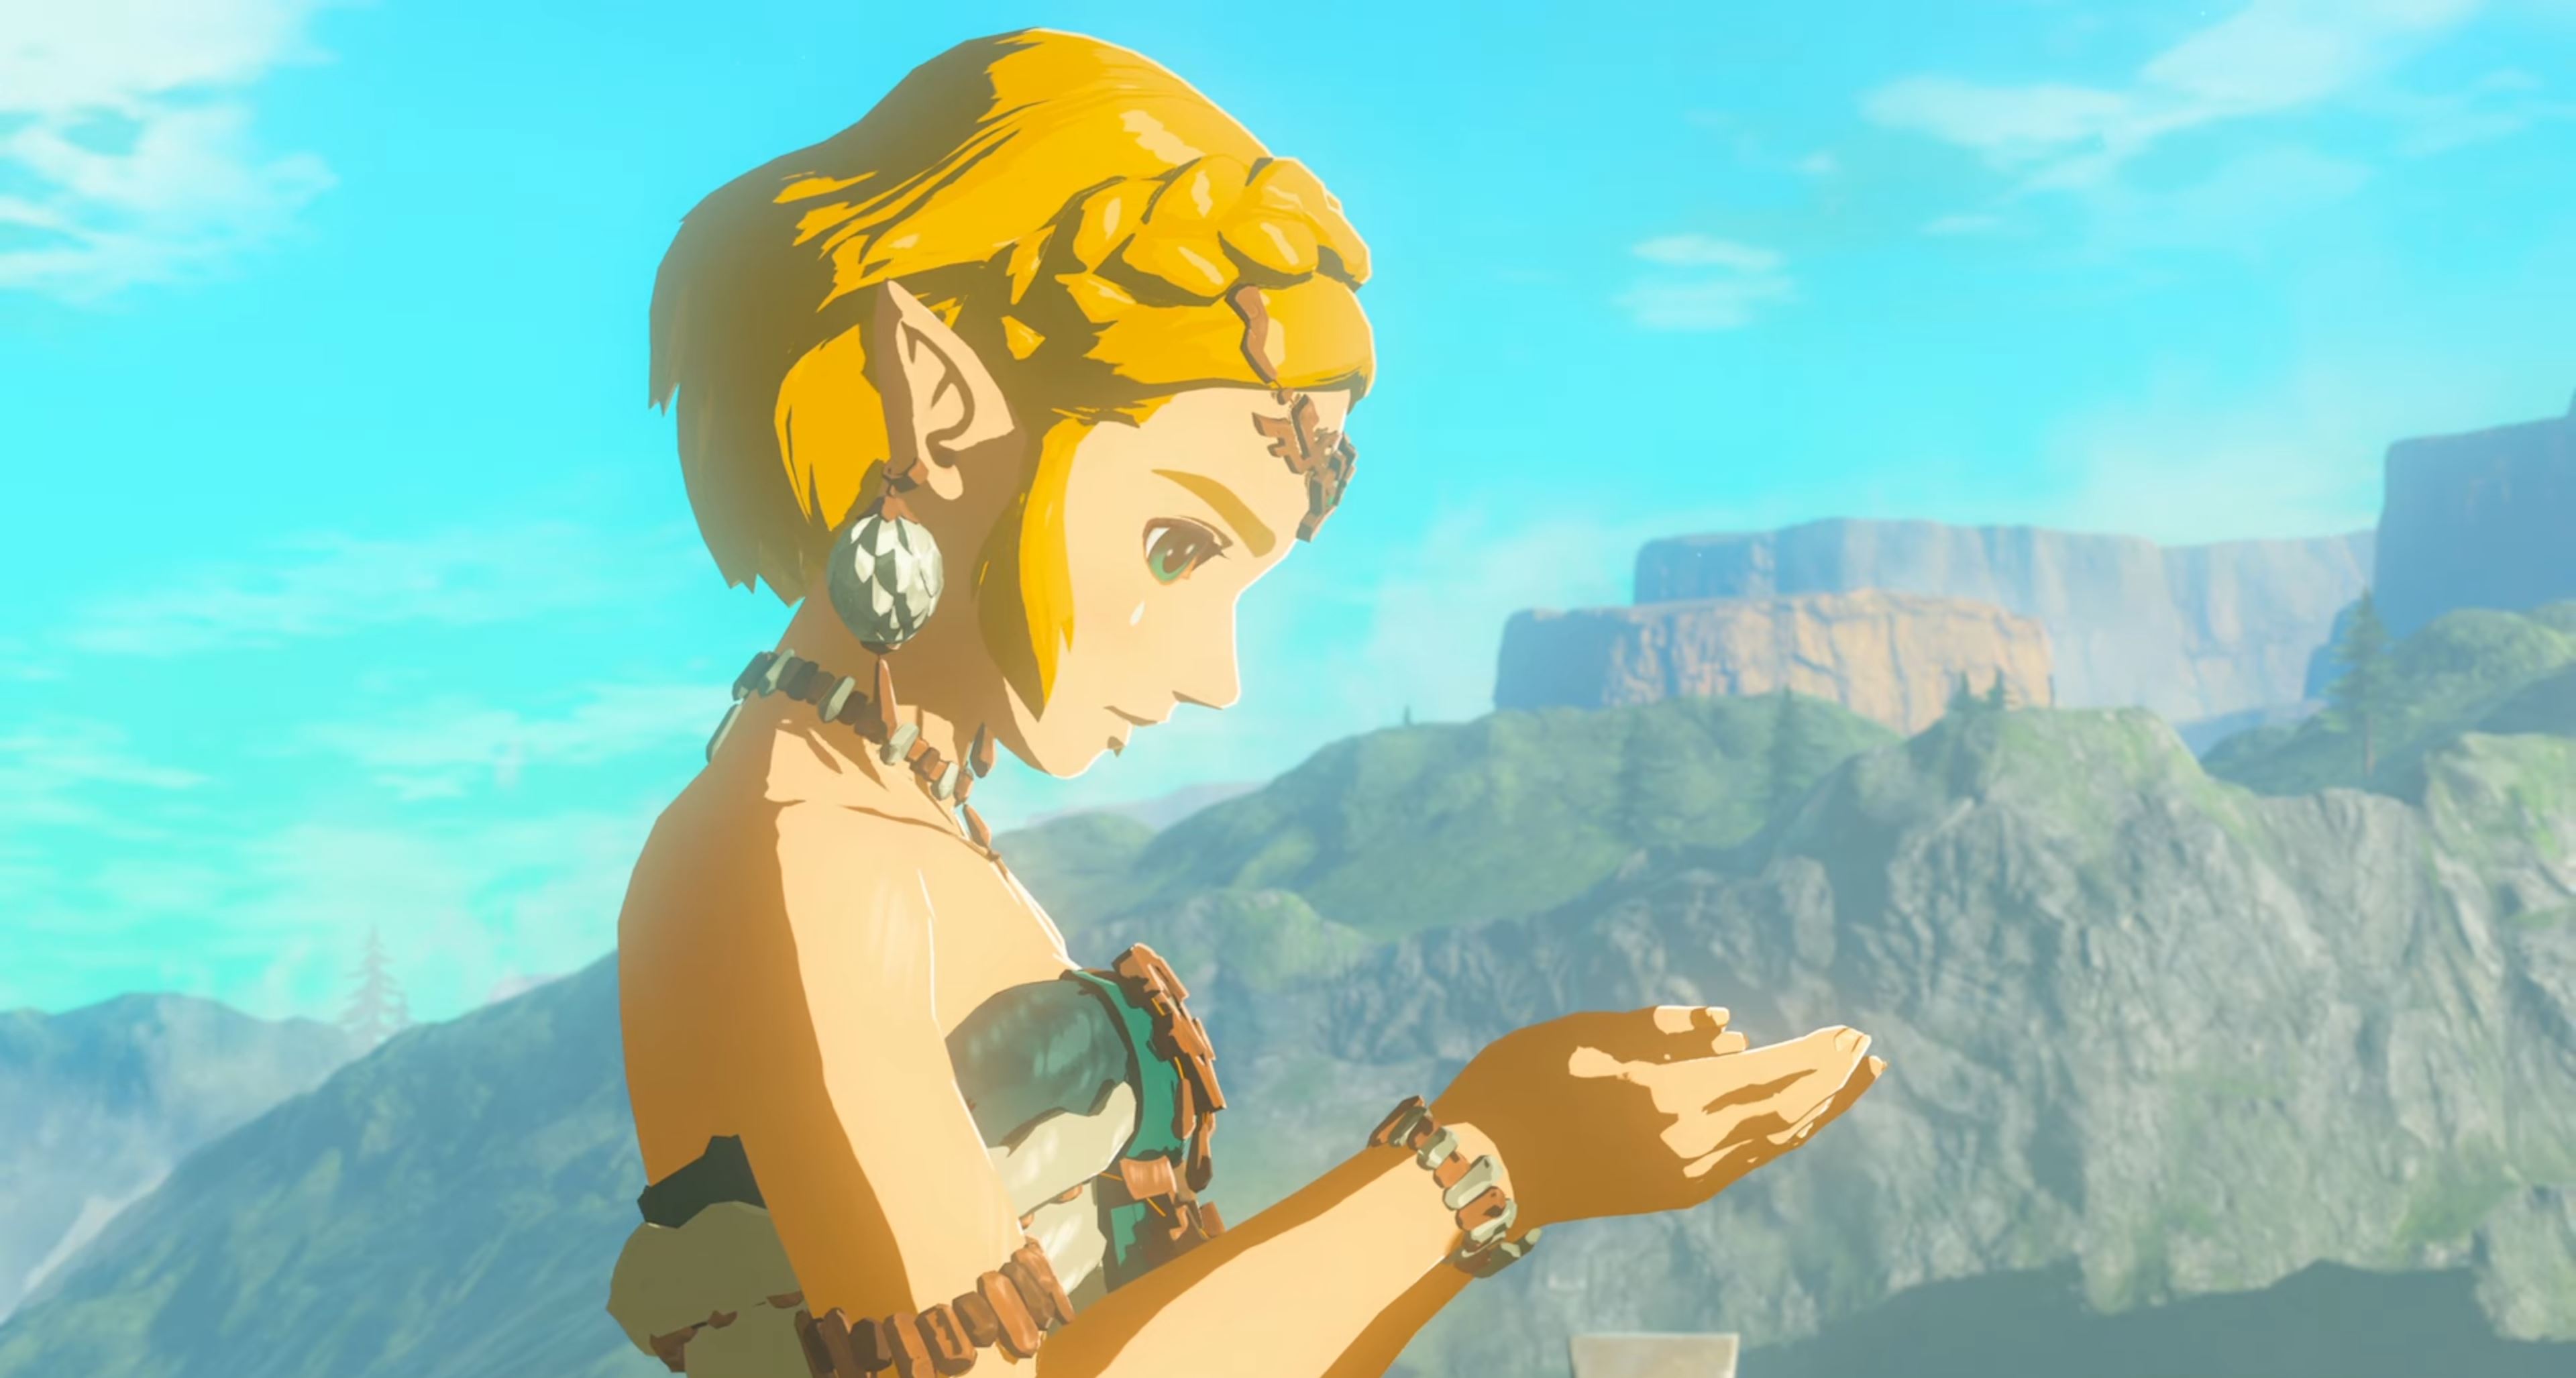 The Legend of Zelda: Tears of the Kingdom' release date, and